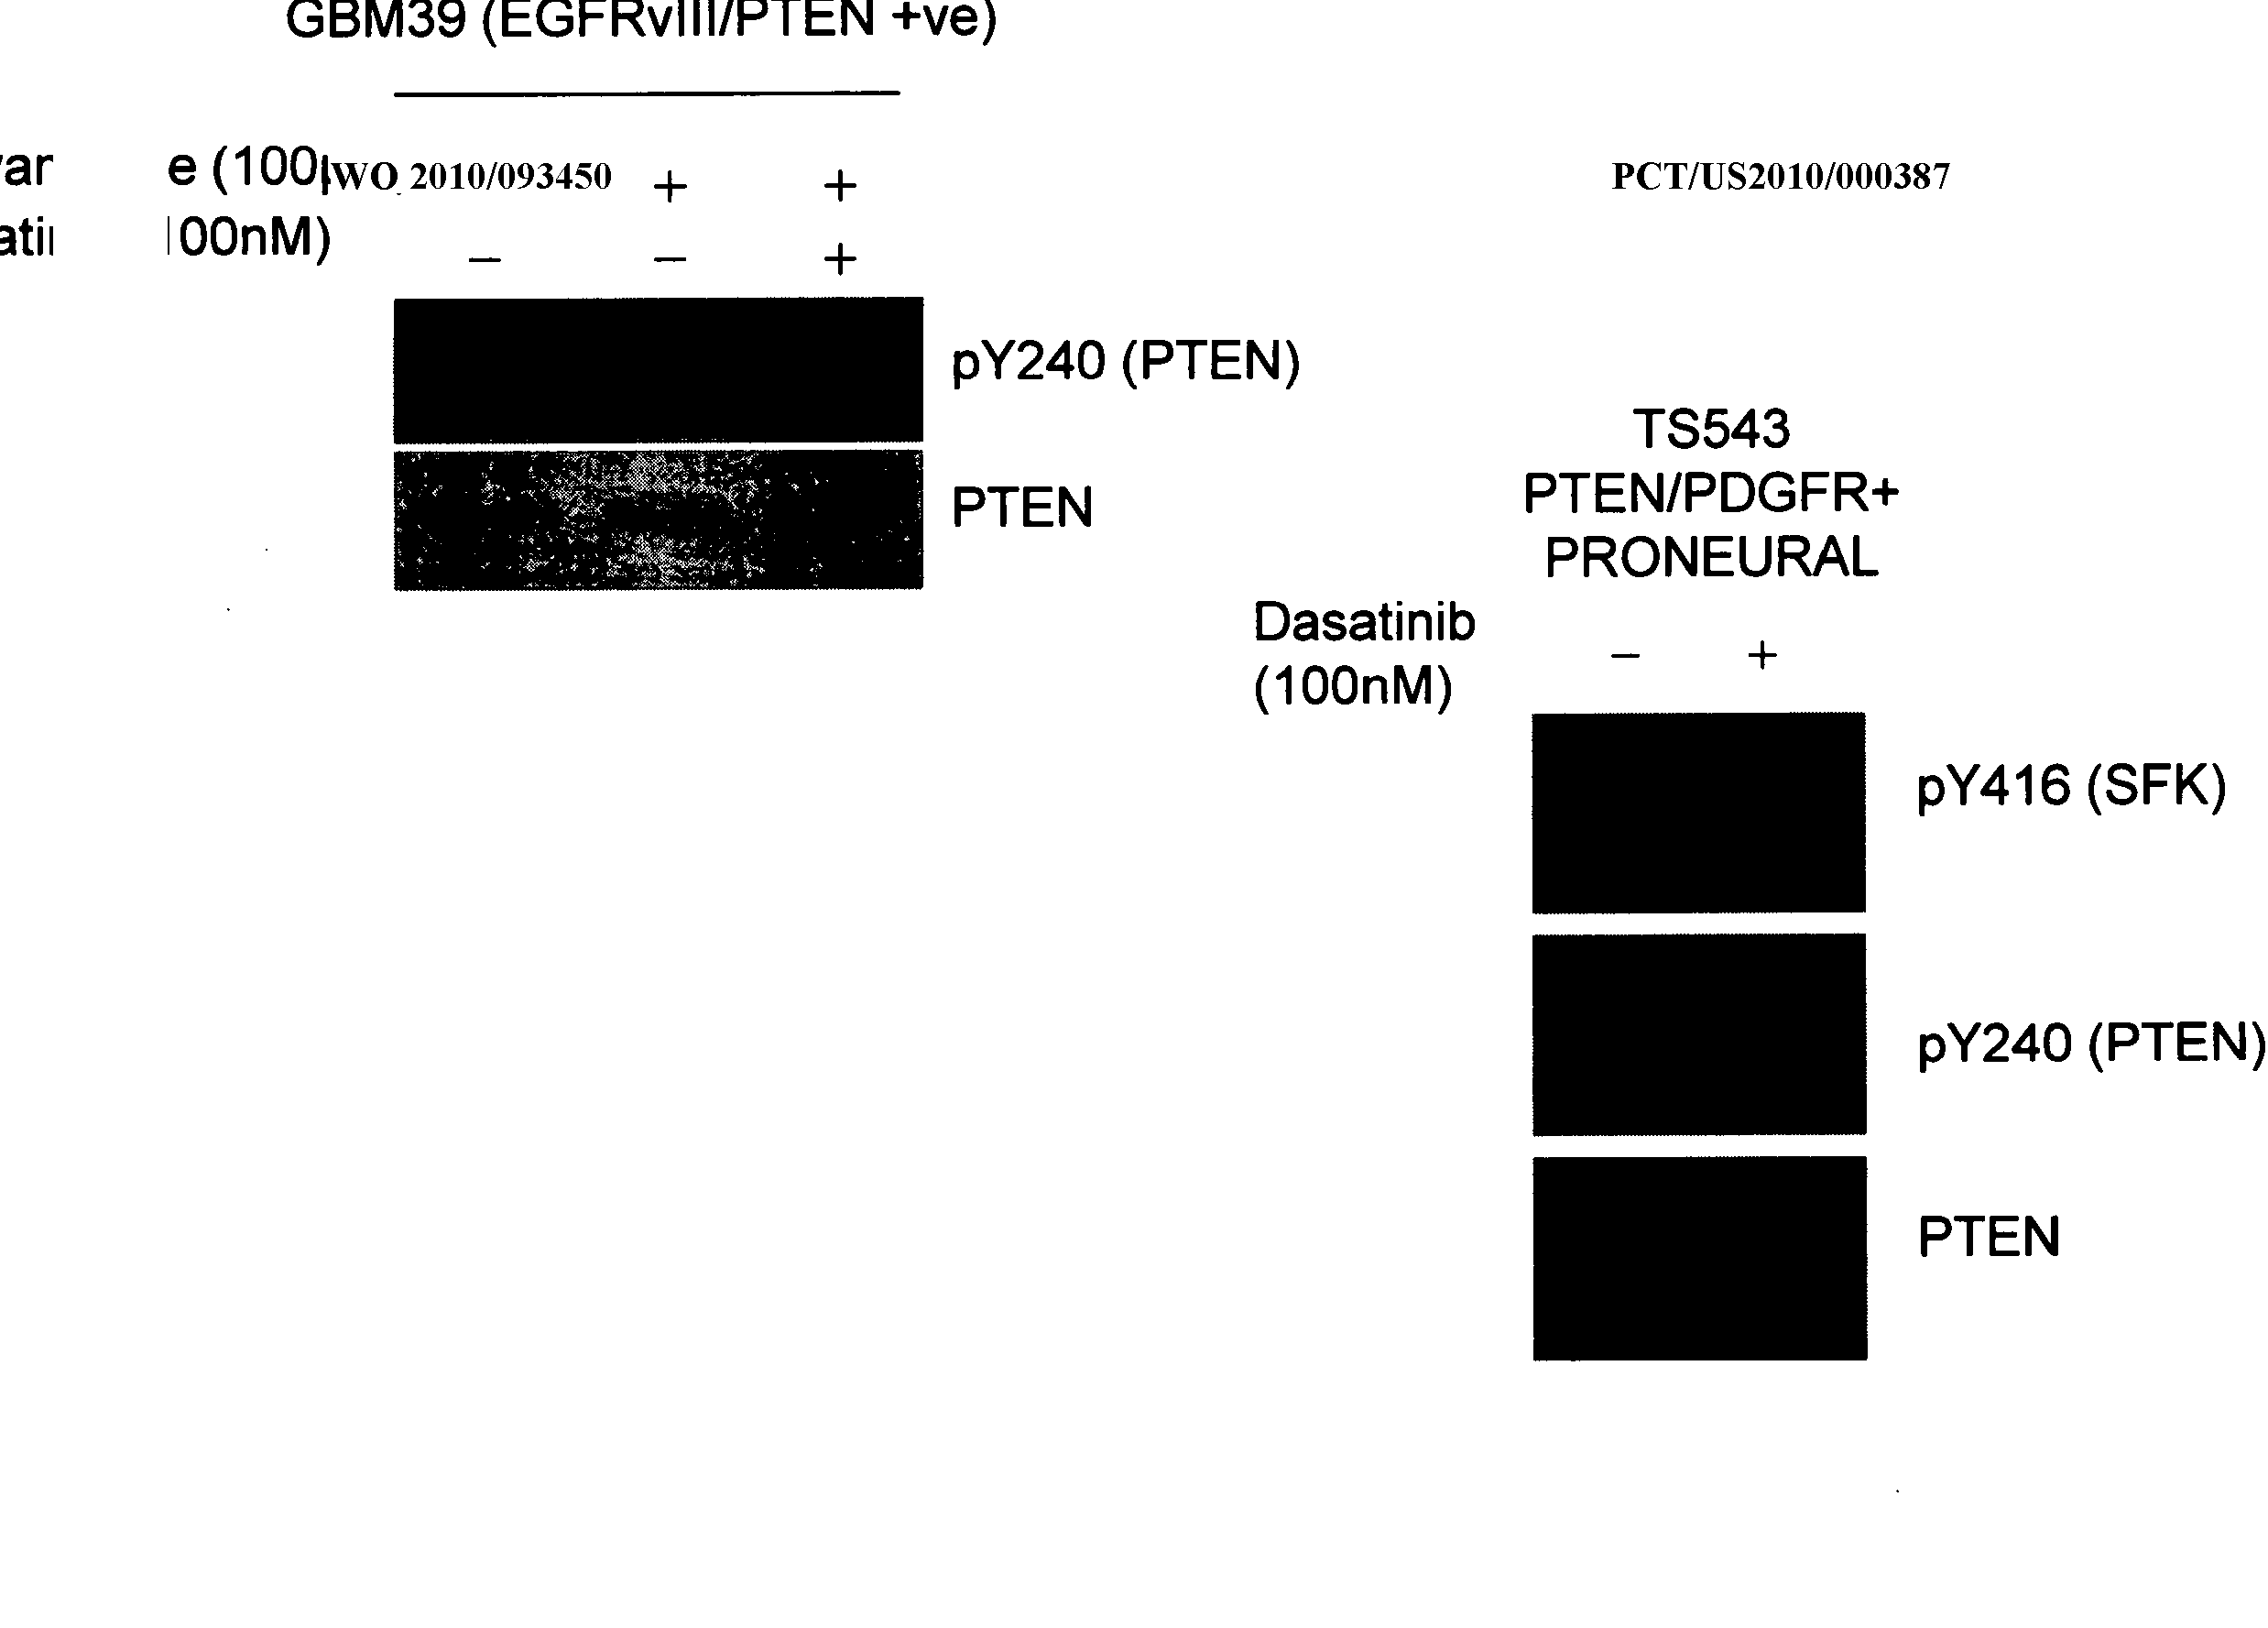 Pten phosphorylation-driven resistance to cancer treatment and altered patient prognosis